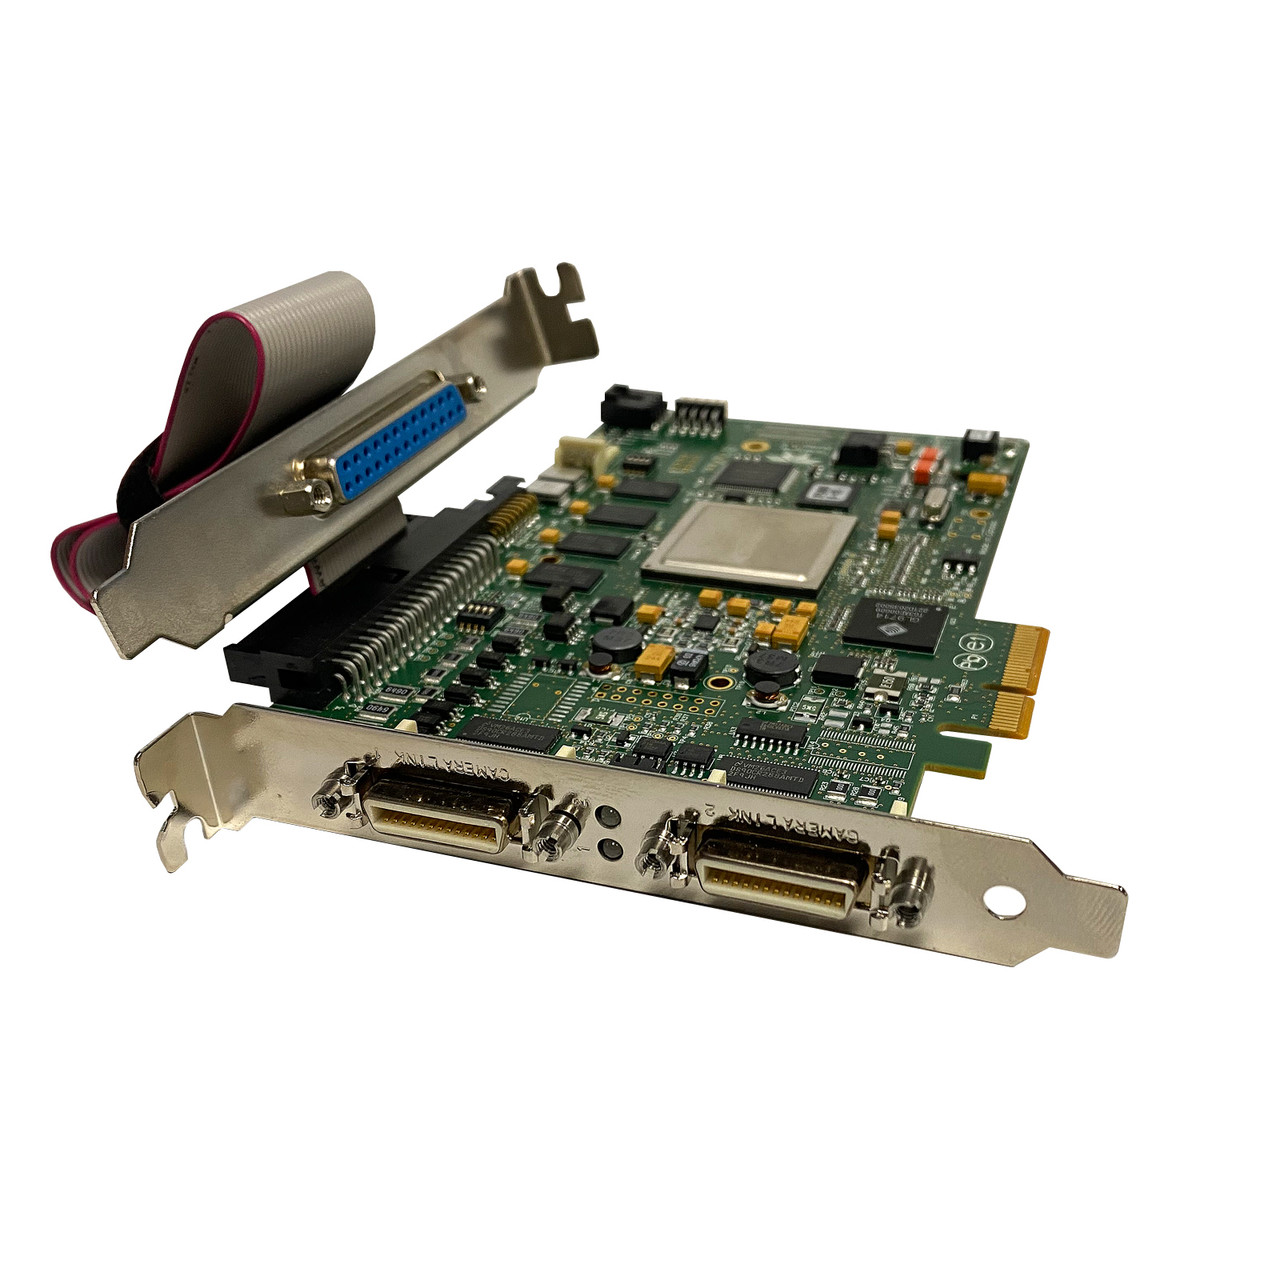 Teledyne OR-X4C0-XPD00 Dalsa Graphics Capture Card